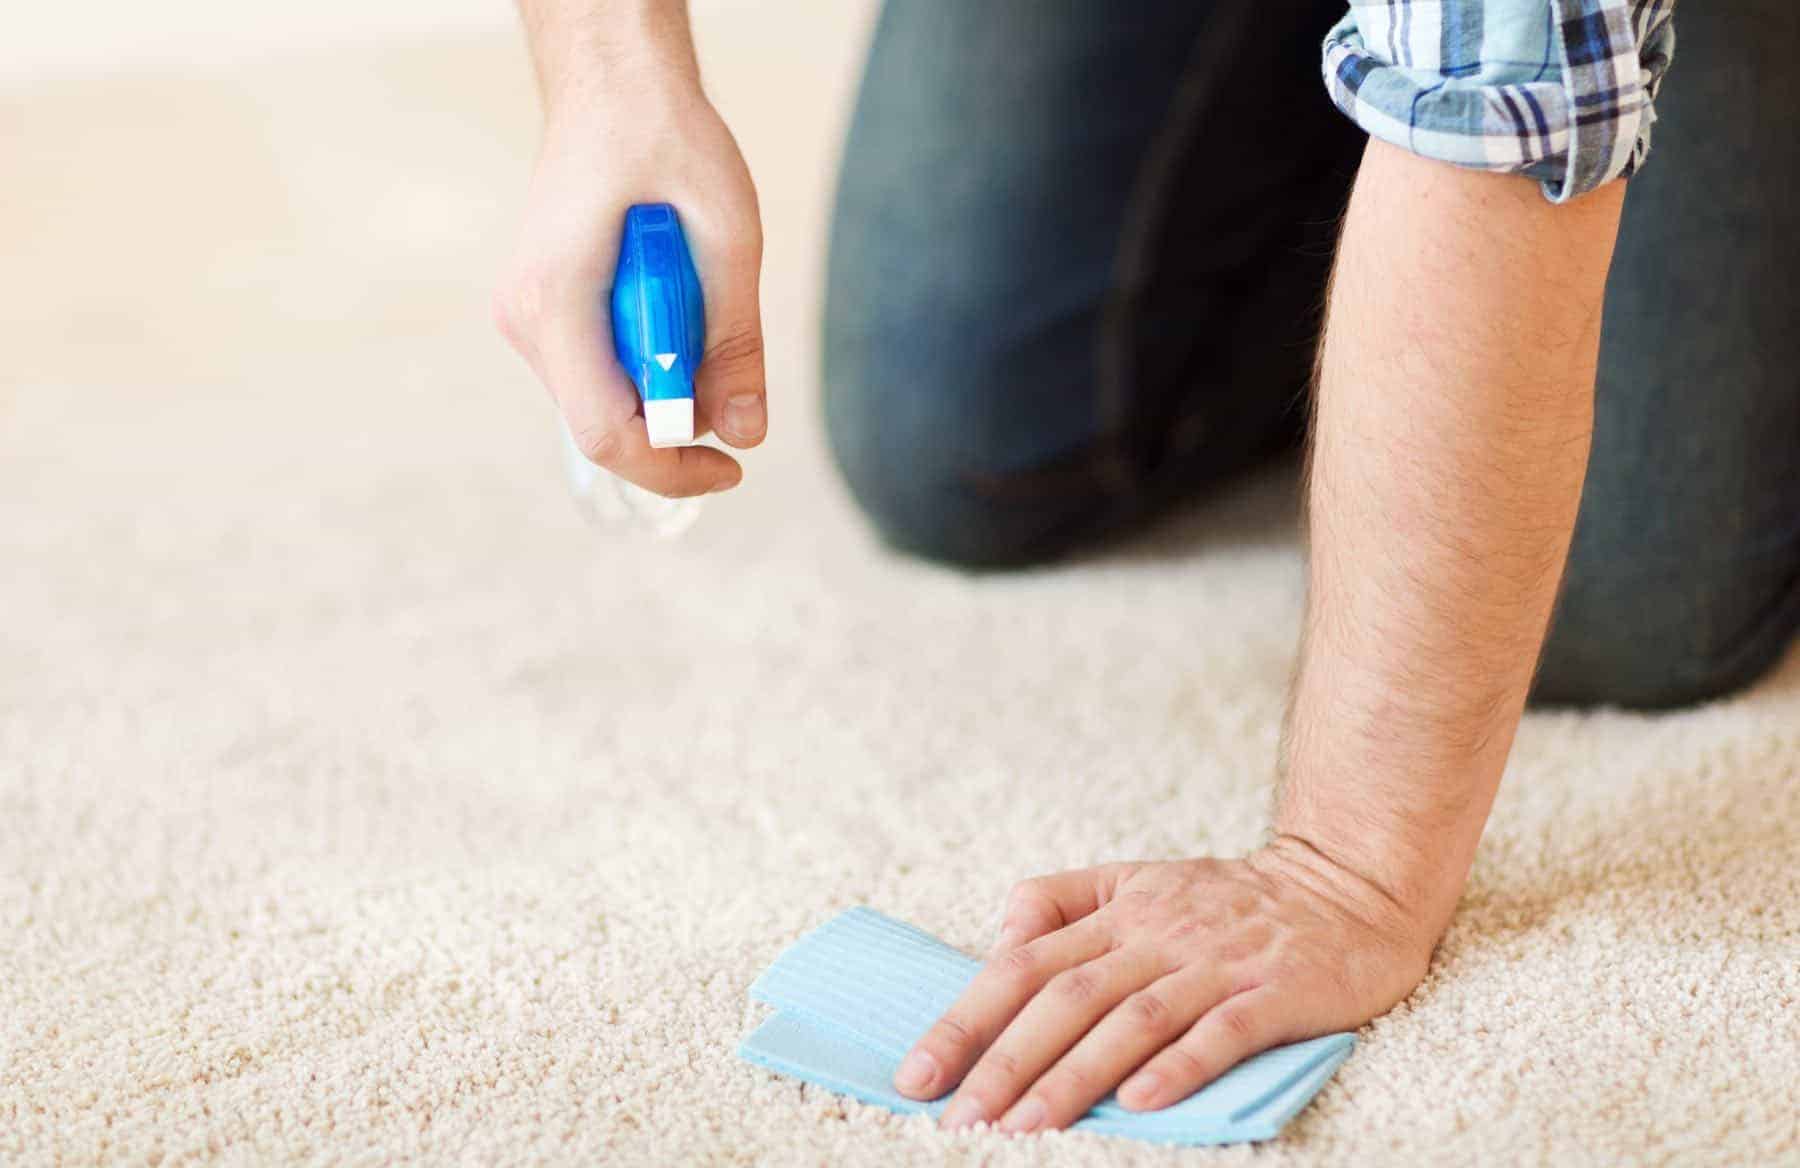 How To Get Hair Dye Out Of Carpet Without White Vinegar